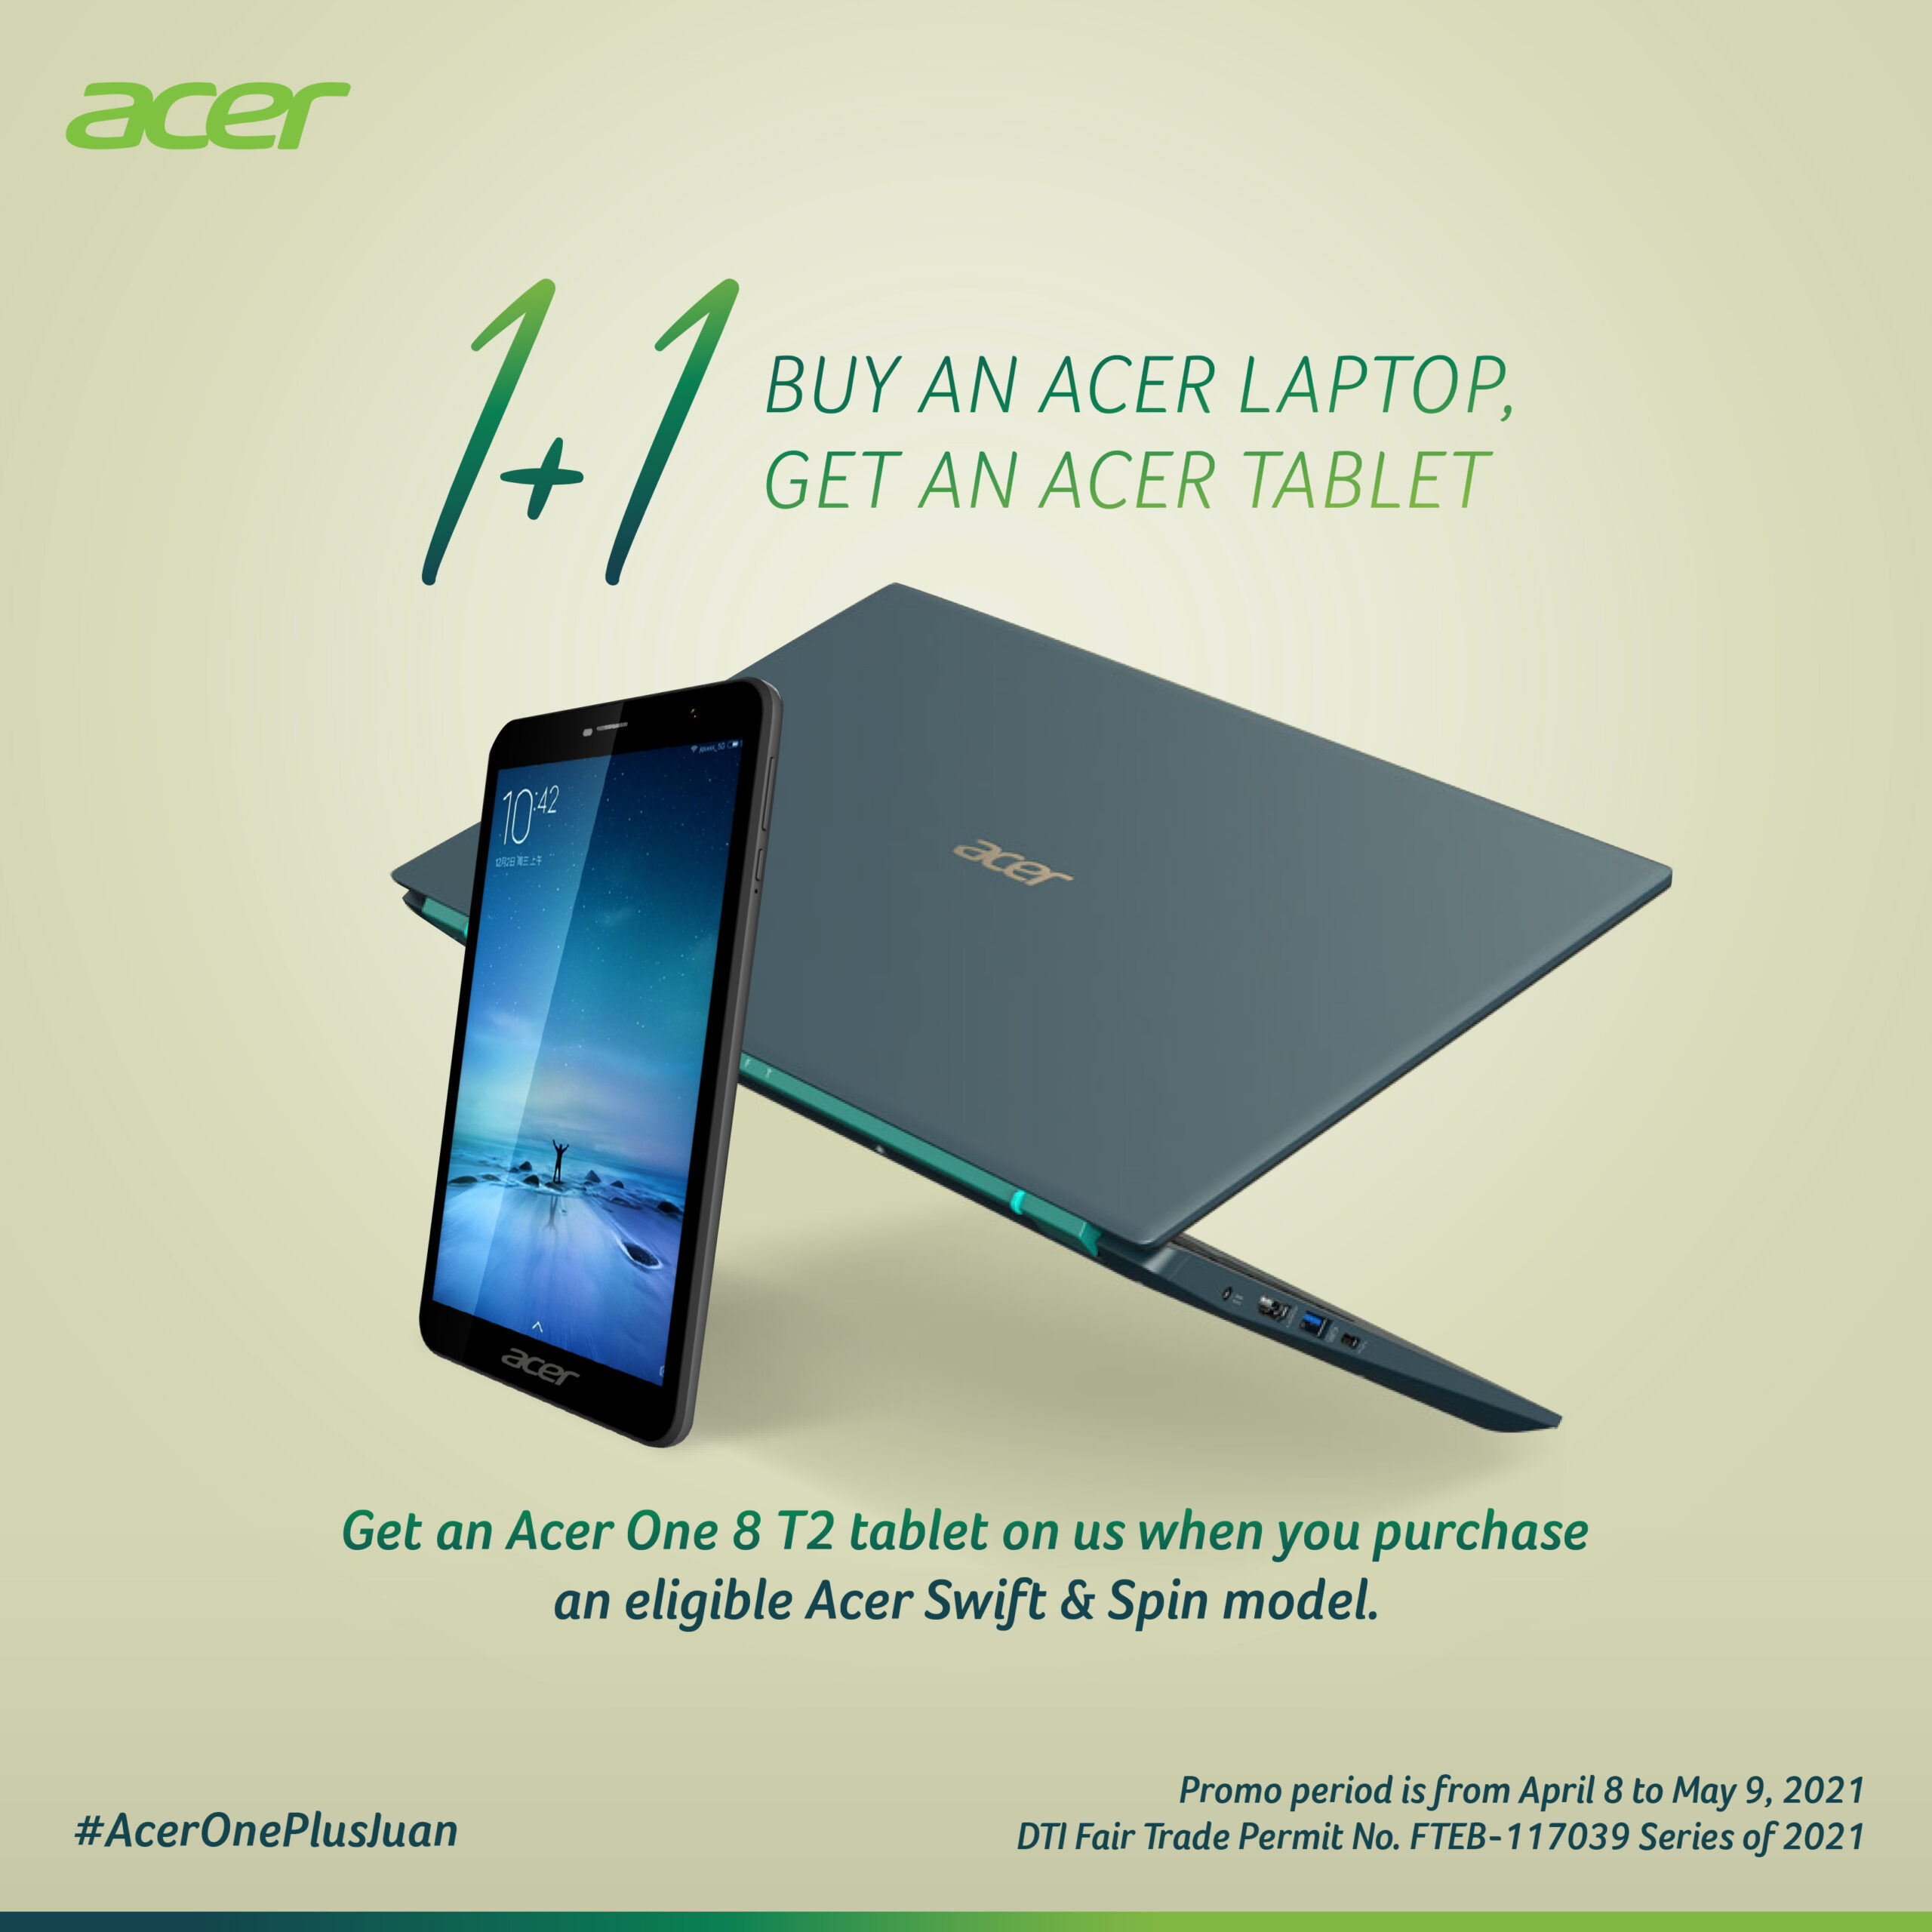 Get a free Acer One 8 T2 Tablet in #AcerOnePlusJuan bundle